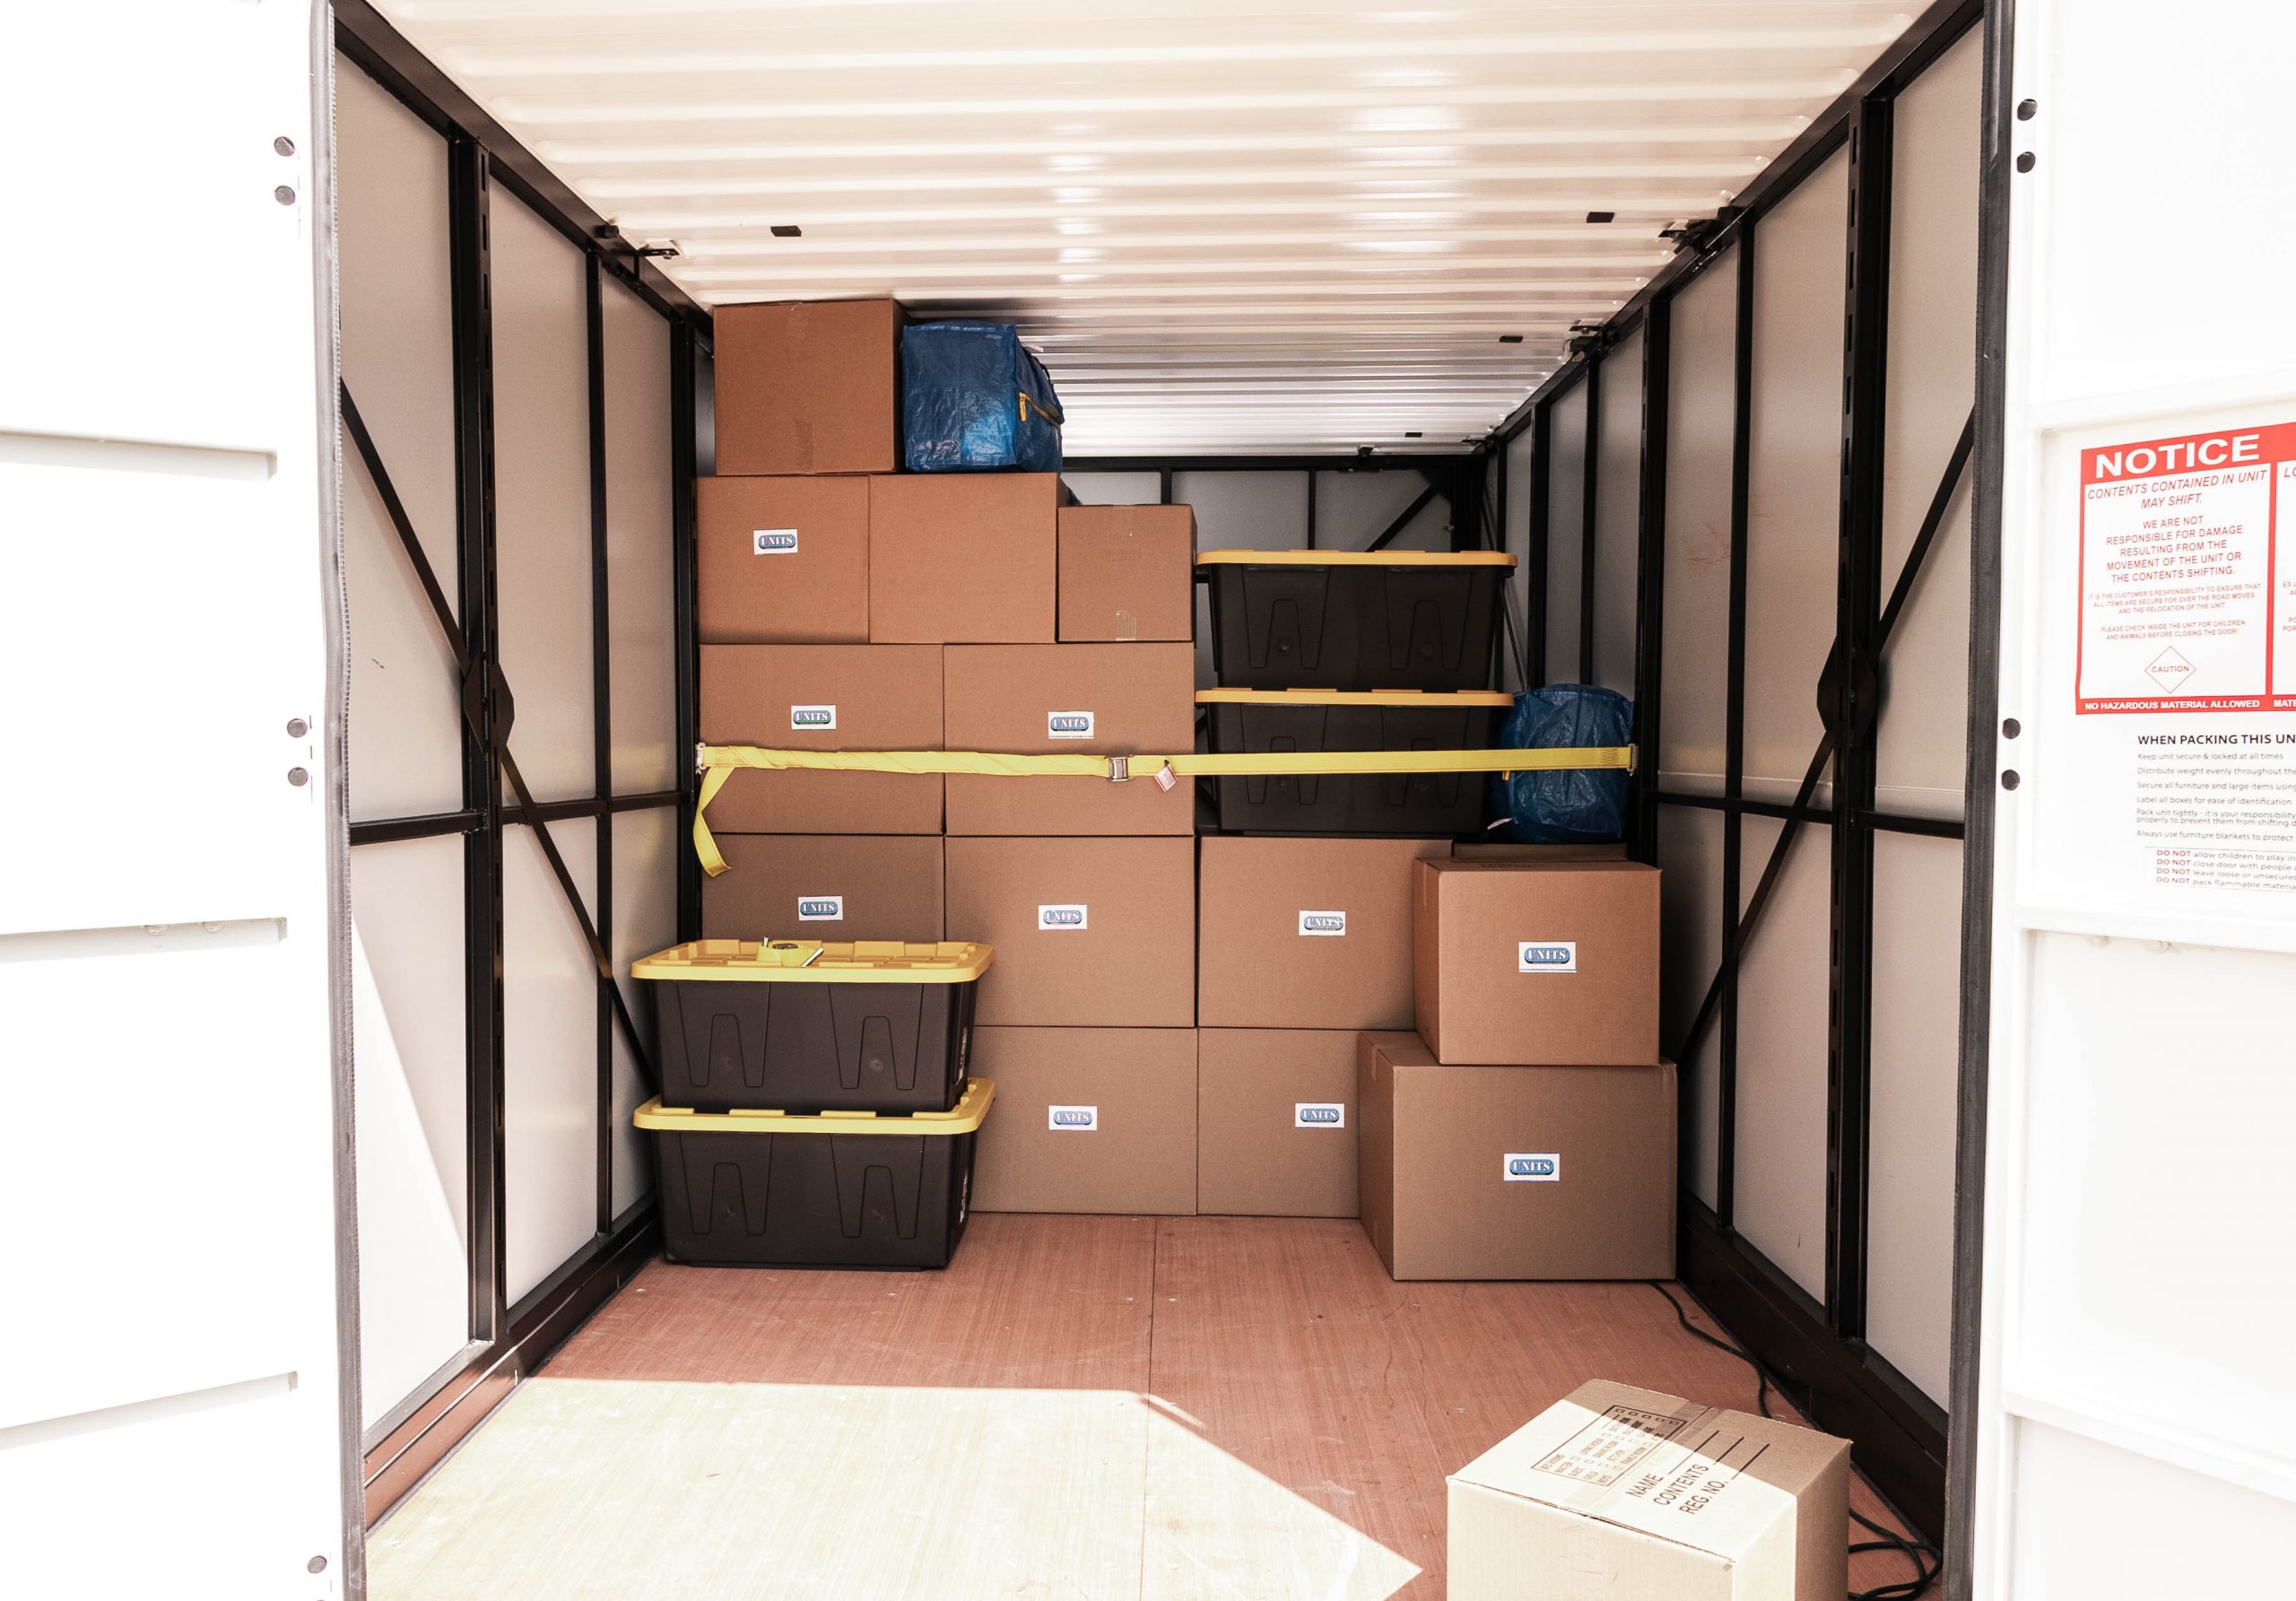 Spacious storage options for whatever your needs may be. UNITS Moving and Portable Storage of Atlanta